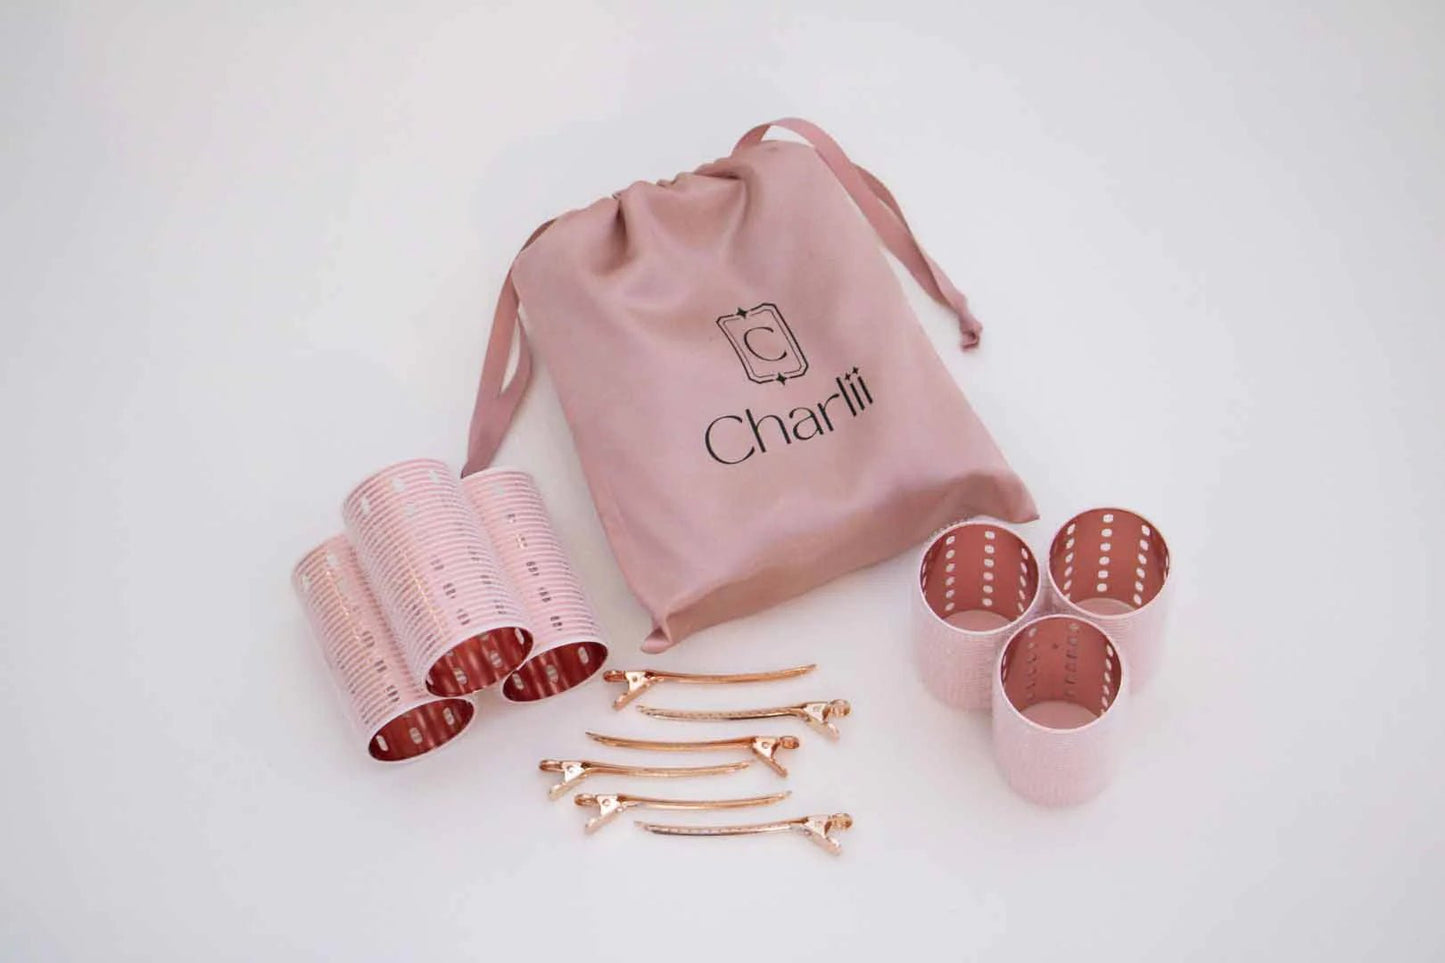 Charlii The Volume Set - Xtra Wide Quick Grip Rollers Rose Gold - shelley and co